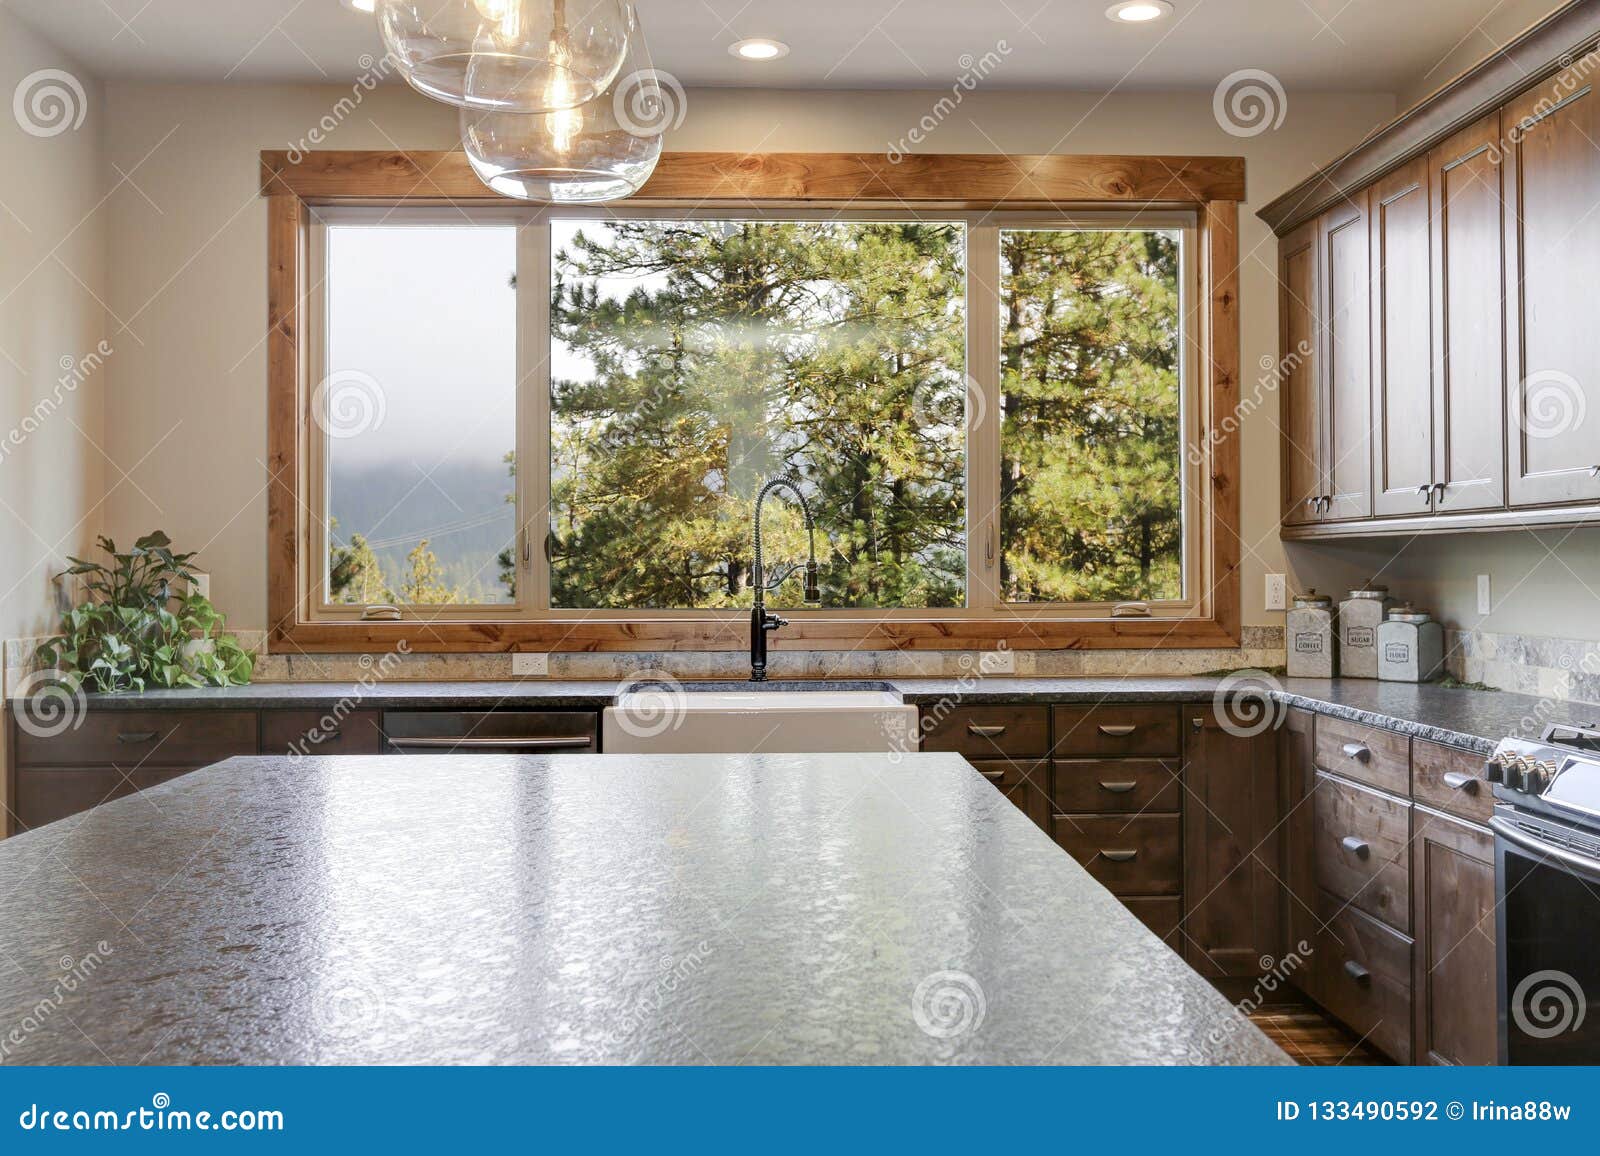 Luxurious Open Plan Kitchen Design With Large Center Island Stock Photo Image Of Renovated